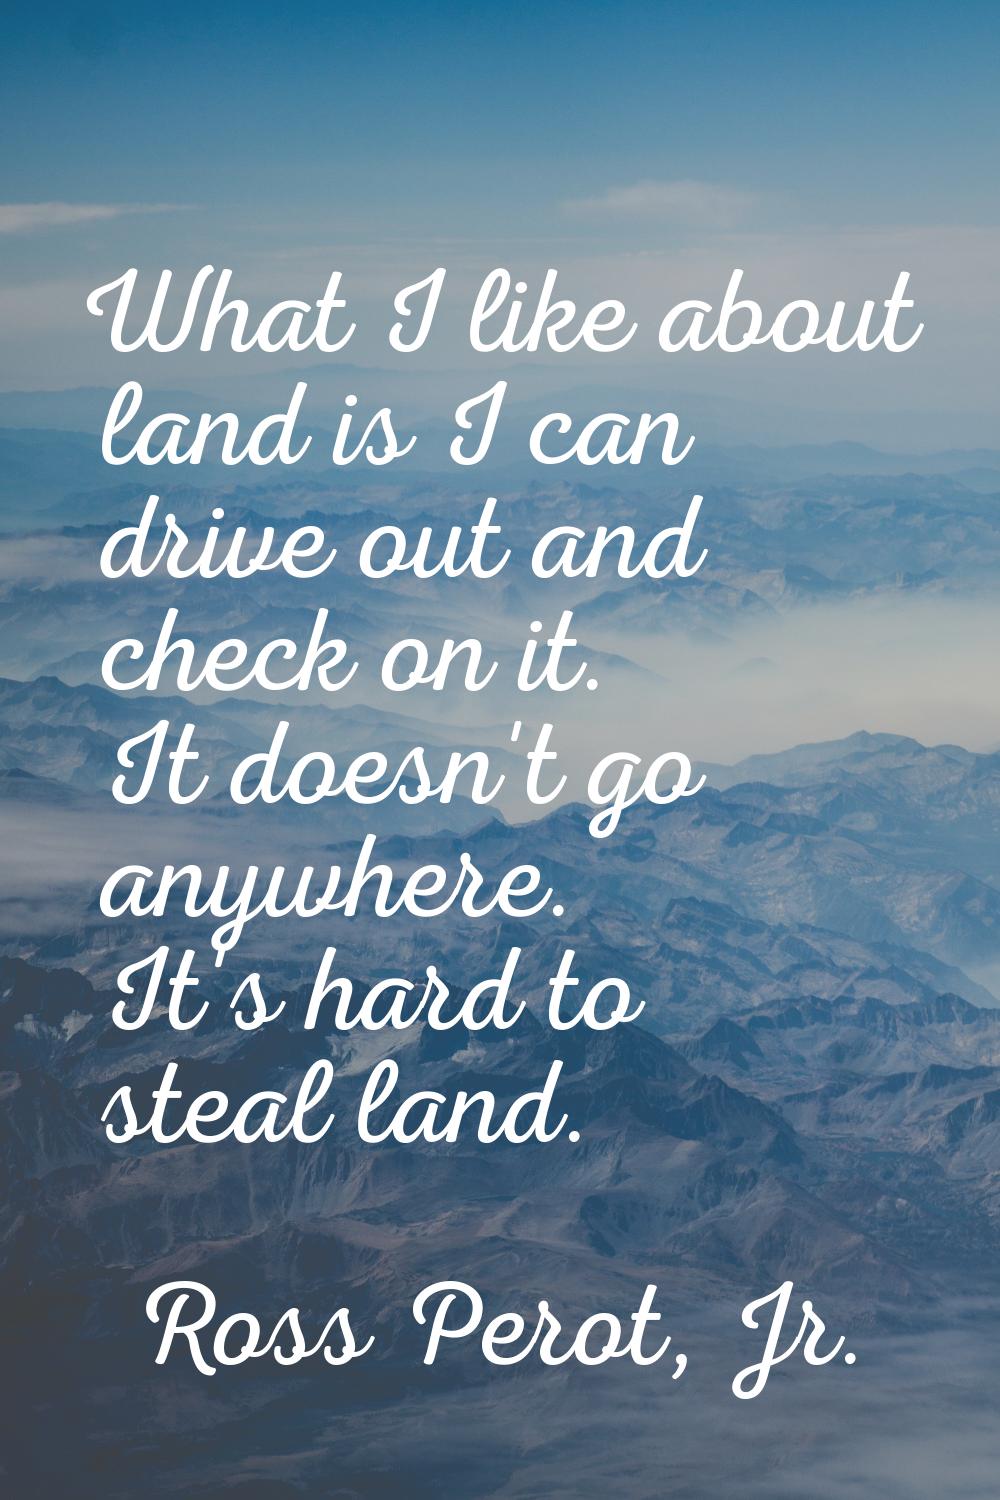 What I like about land is I can drive out and check on it. It doesn't go anywhere. It's hard to ste